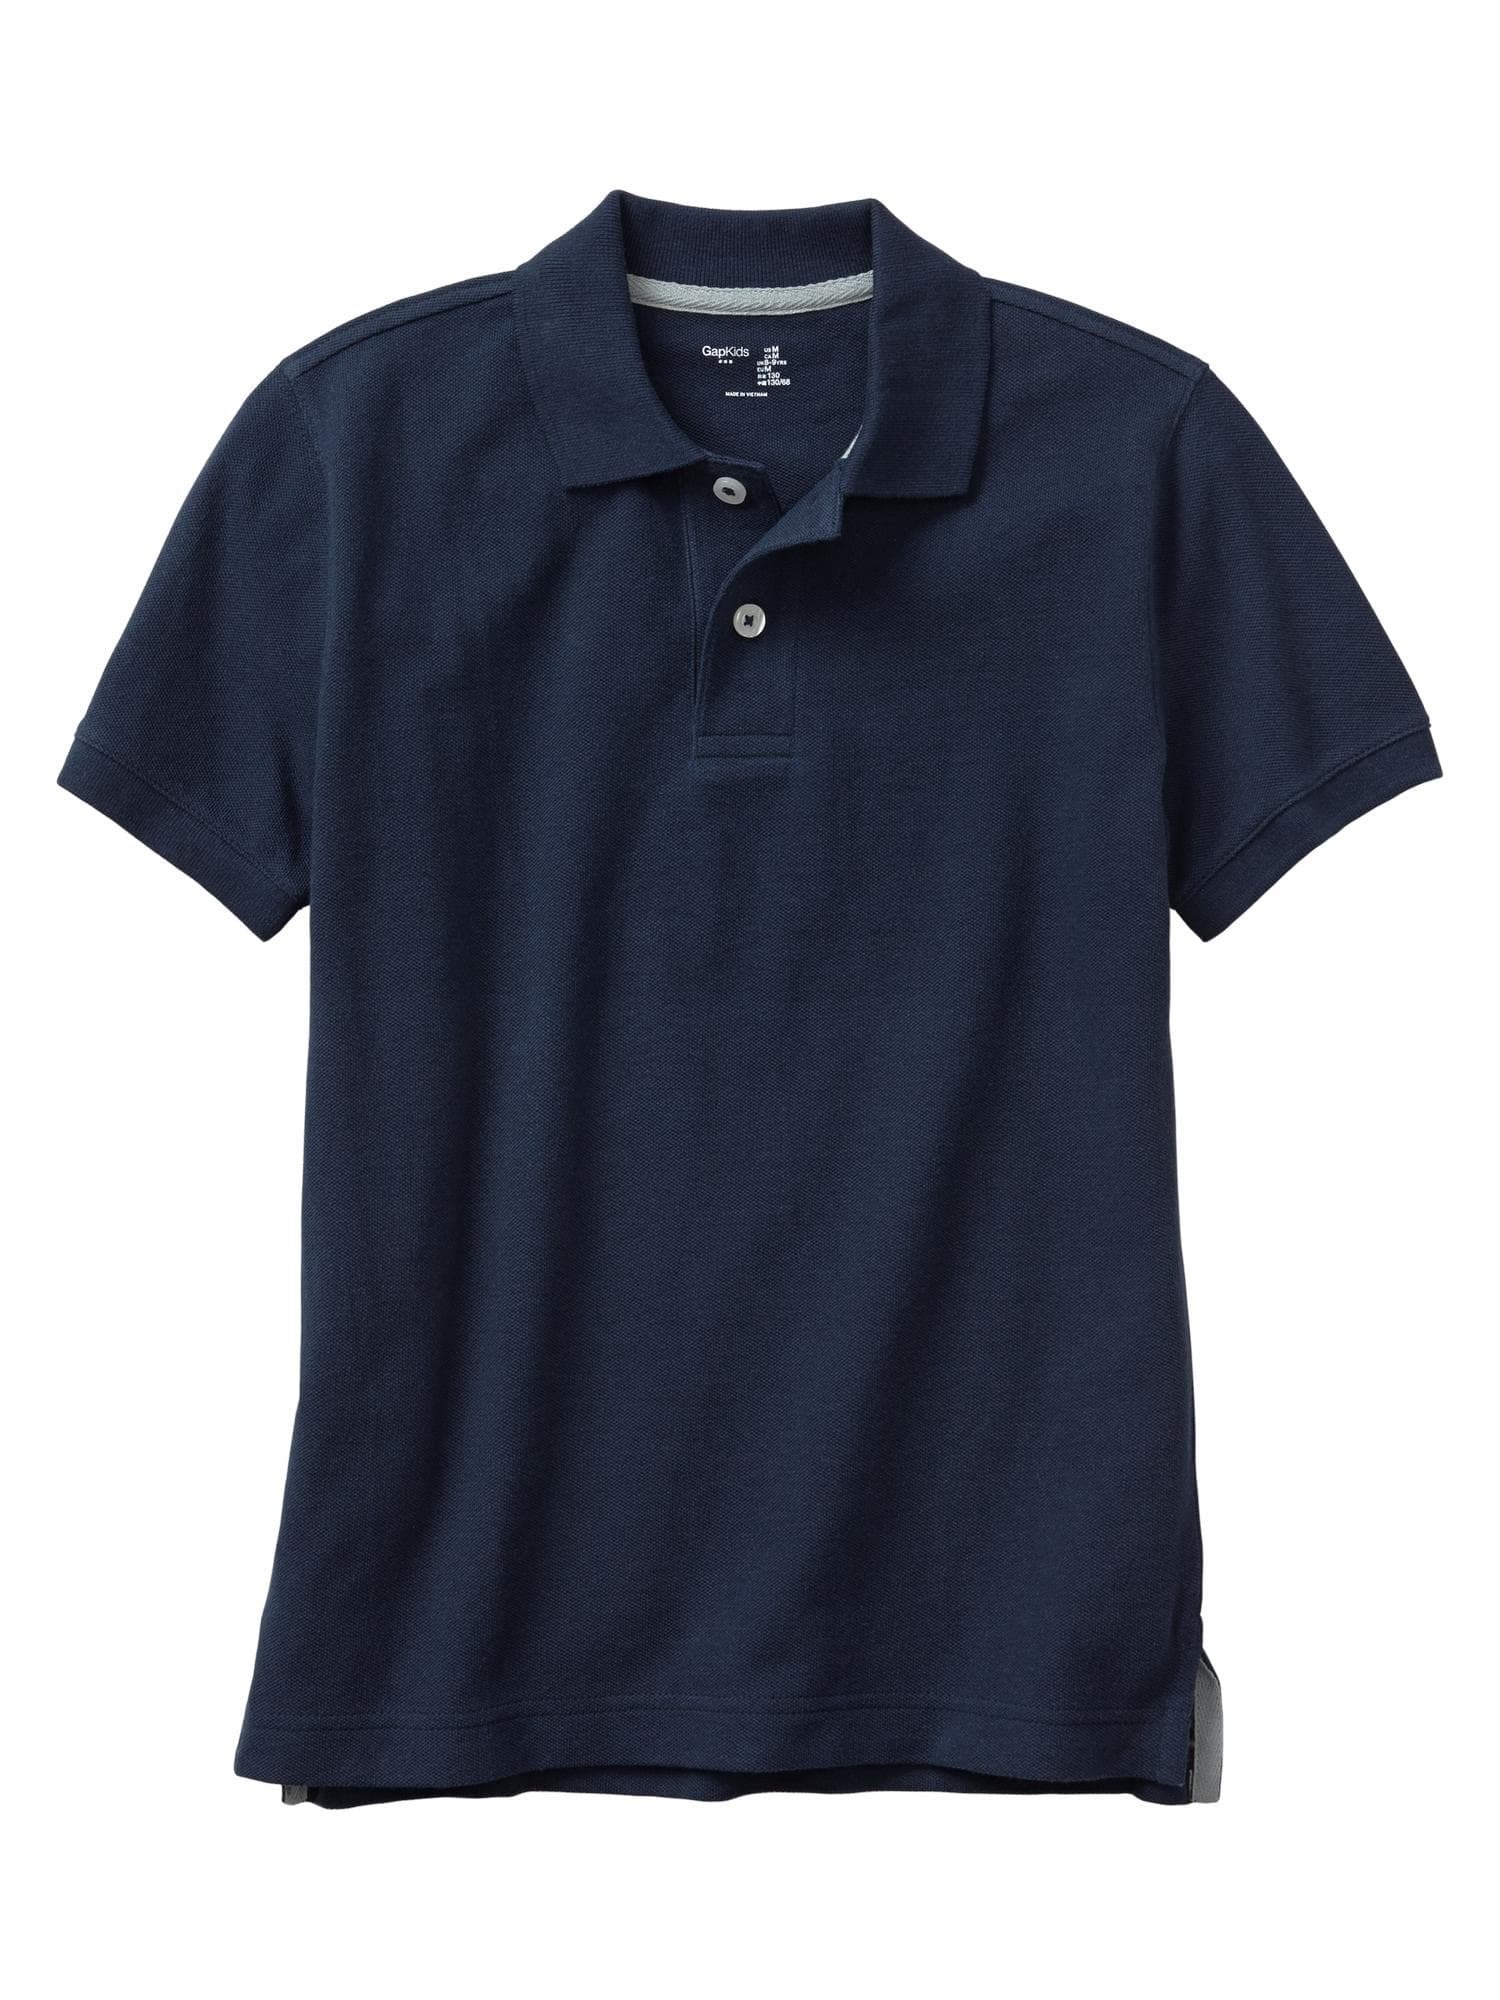 Polo t-shirt product image